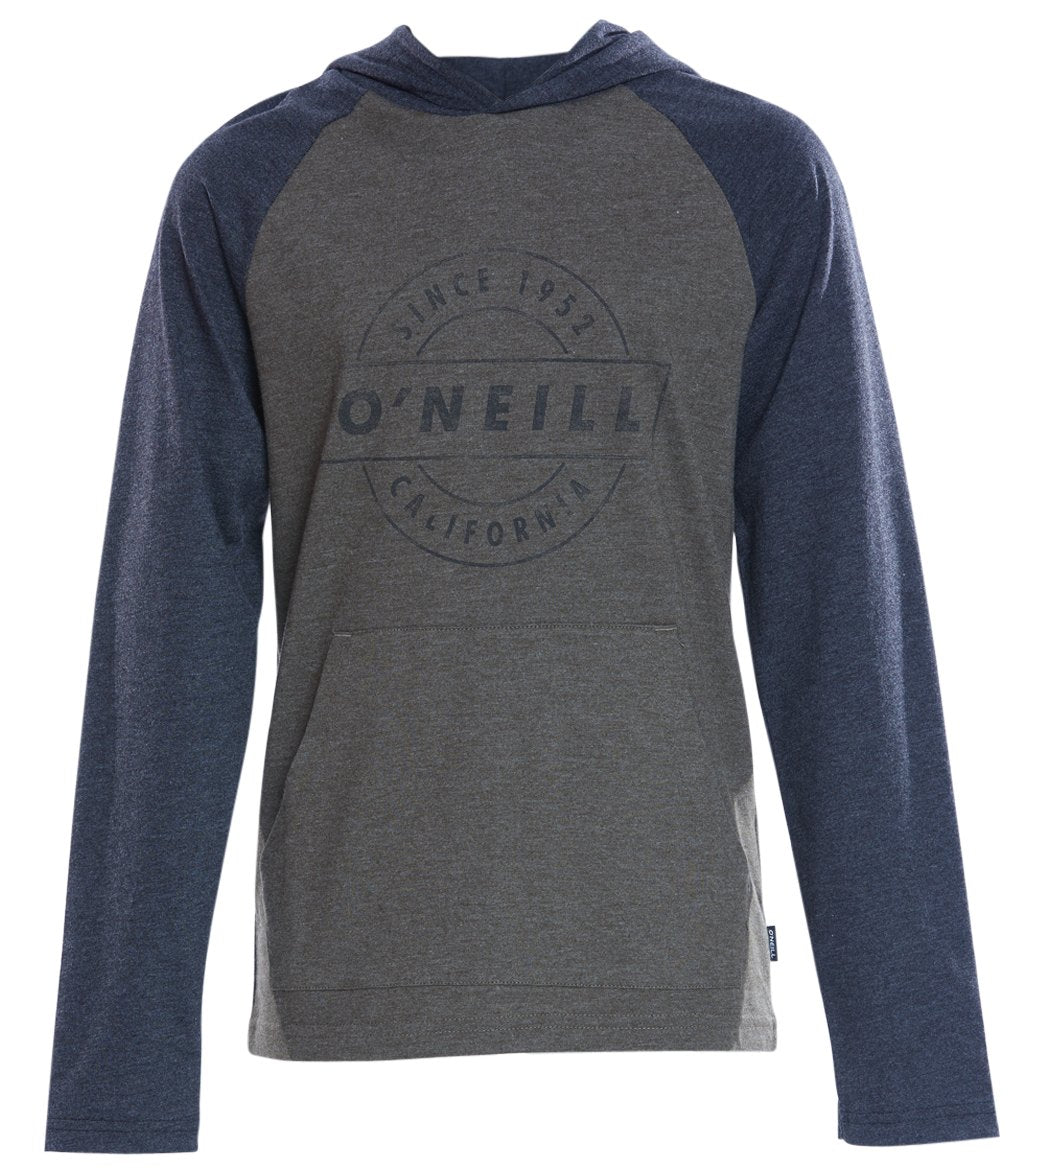 O'neill Boys' Mateo Pullover Hoody Big Kid - Military Green Small Cotton/Polyester - Swimoutlet.com